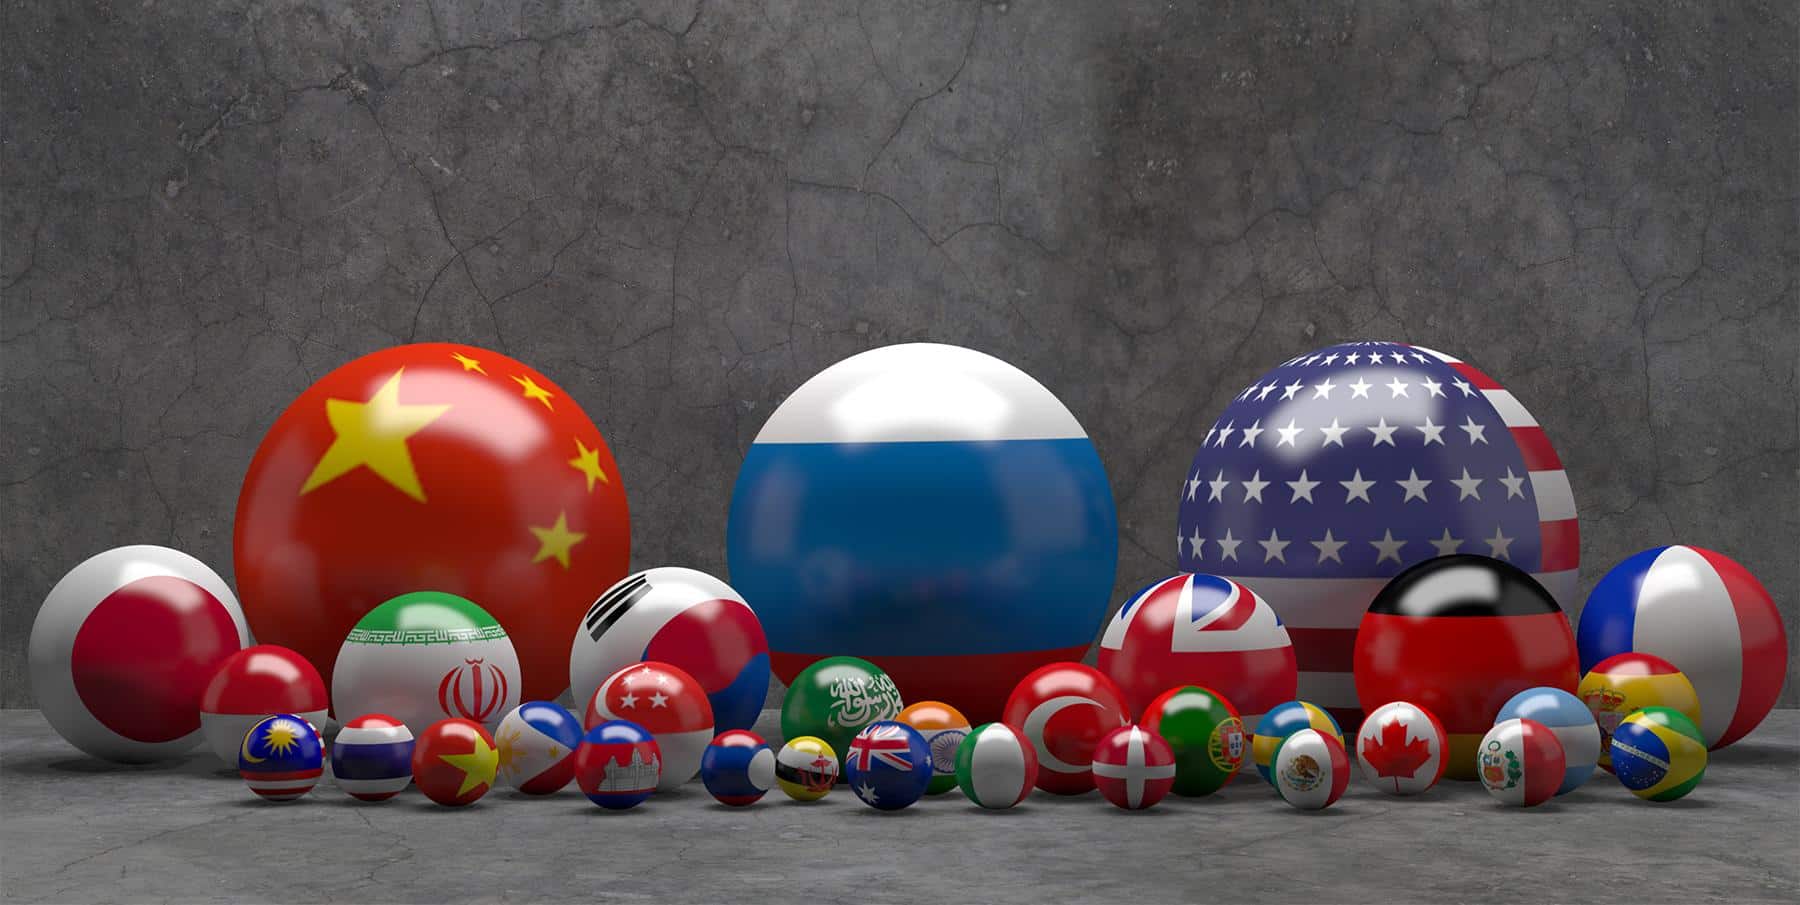 Photo composition showing pool balls with flags of different countries. China, Russia and the US are the biggest balls while Japan, India, SOuth Korea, UK, Germany and France follow in size along 21 smaller flags. Photo: Russian International Affairs Council.